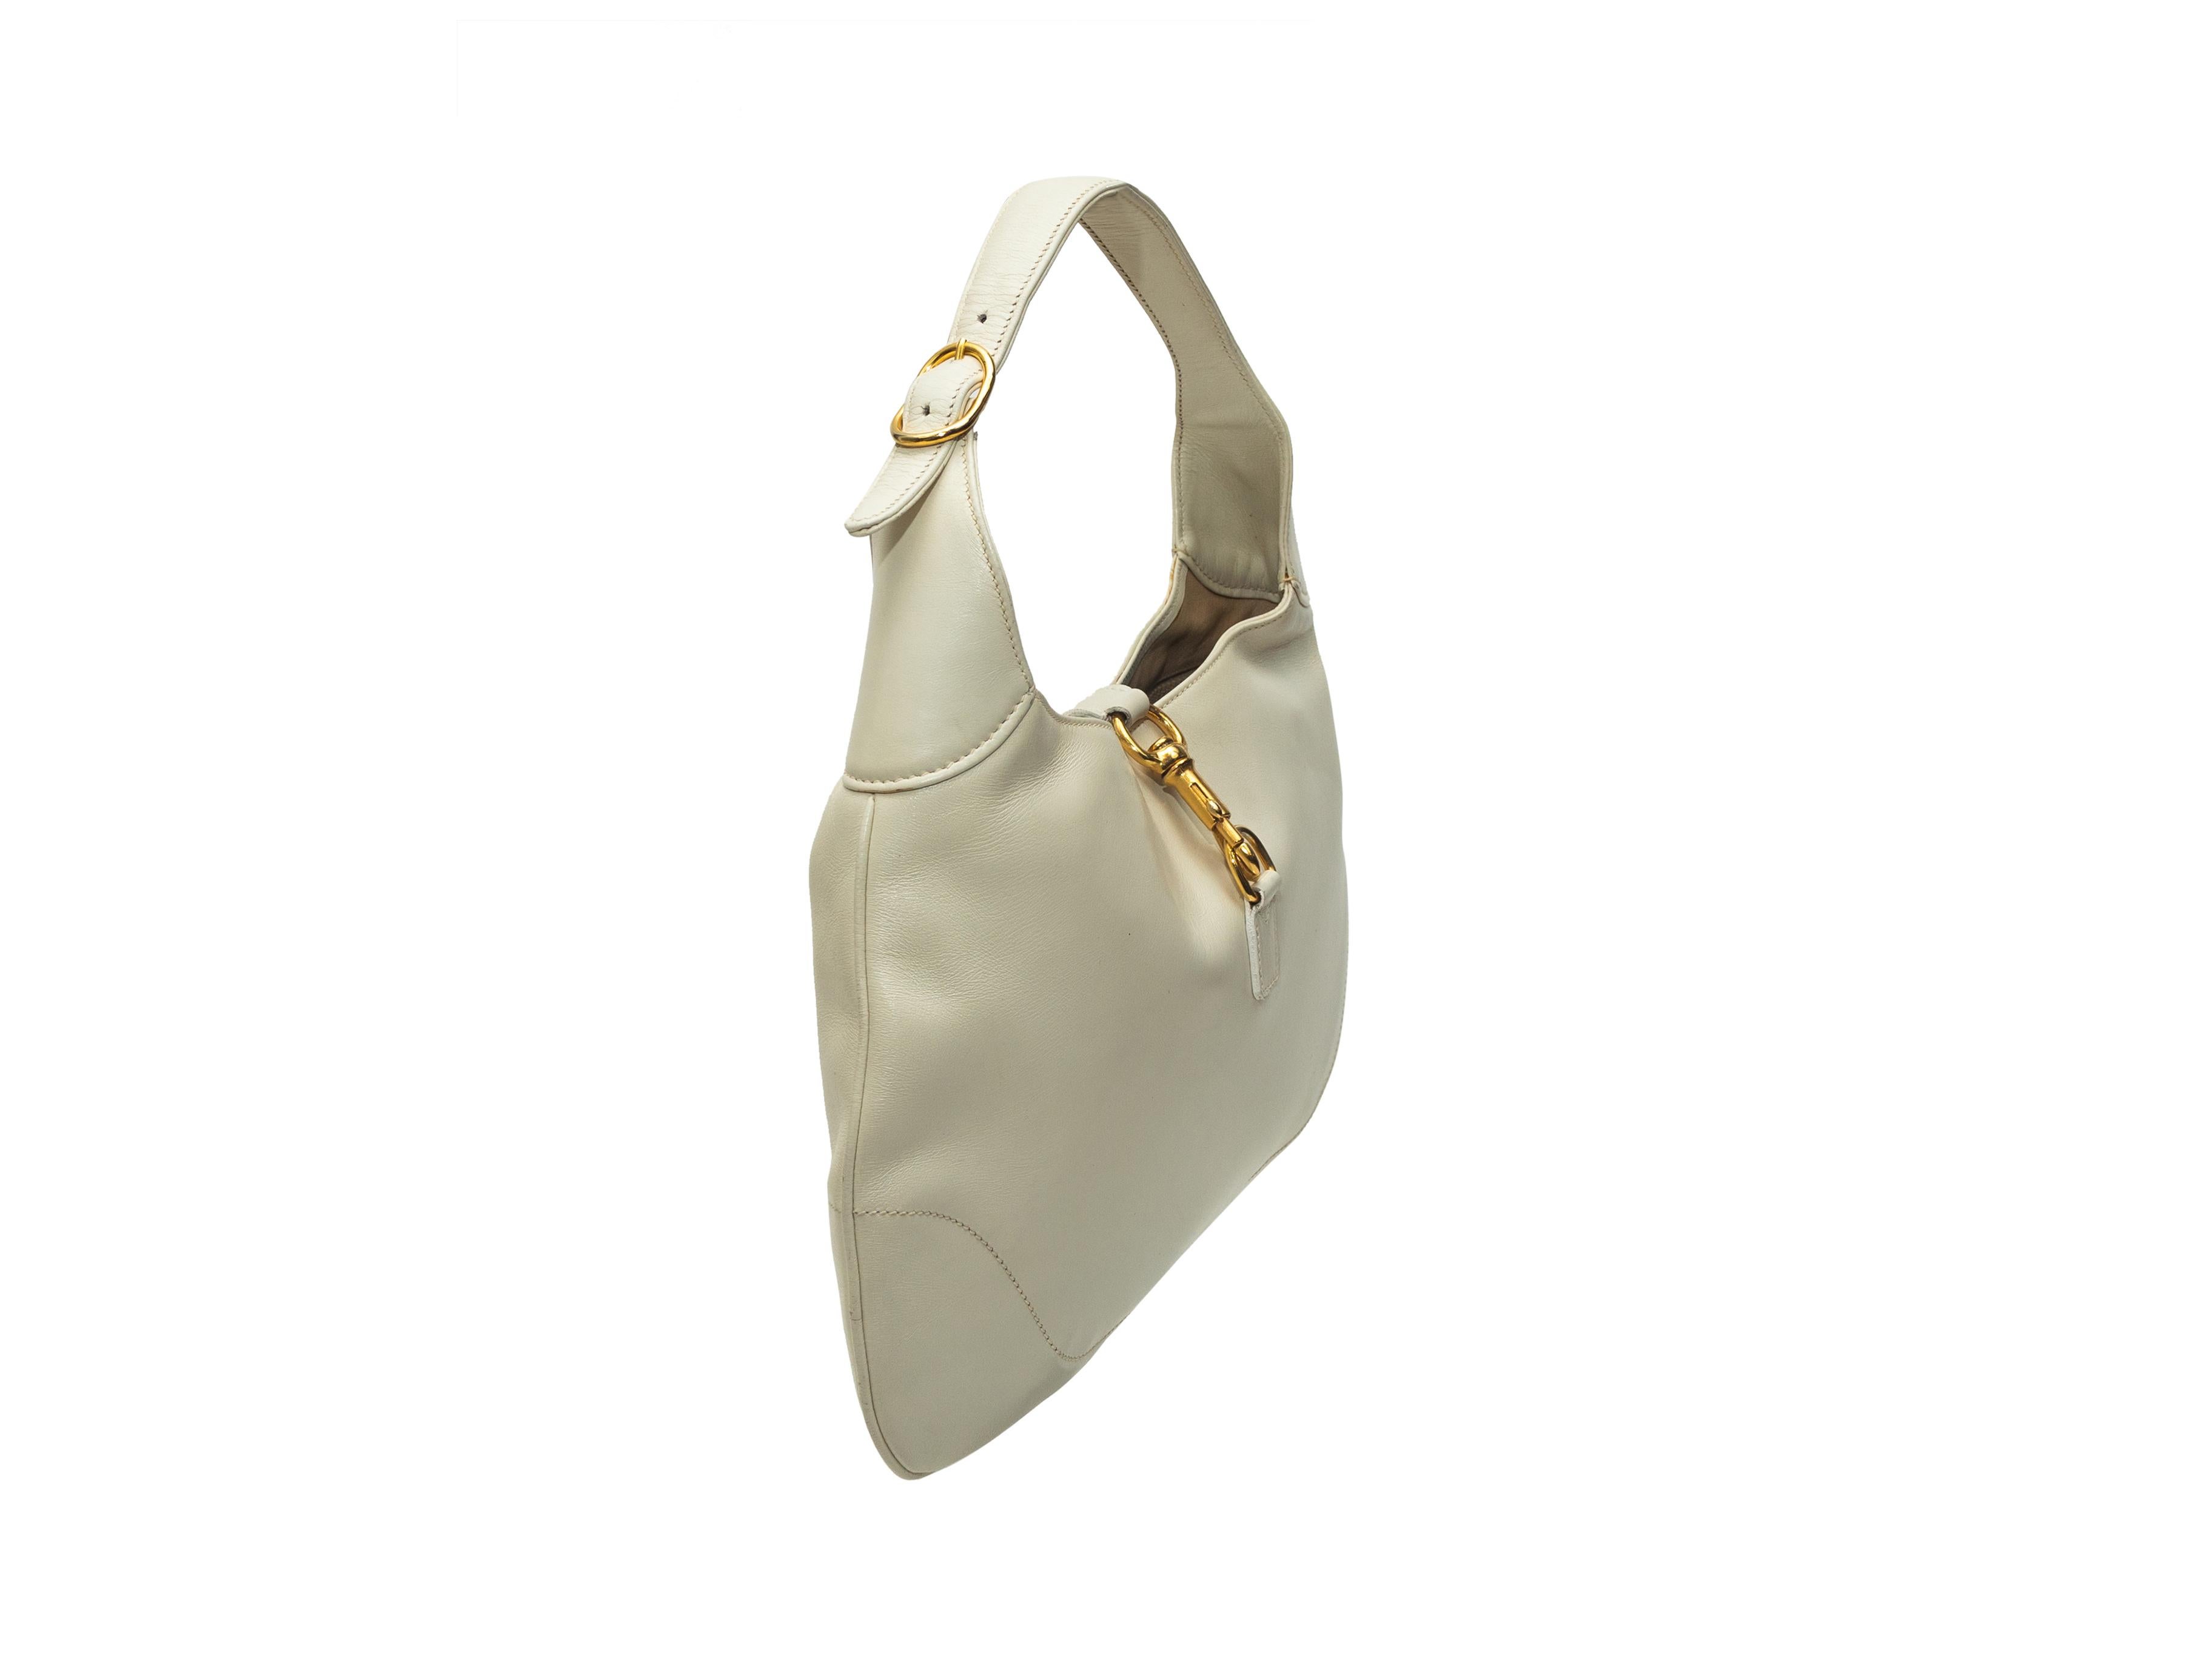 Product details: Vintage white leather Jackie O hobo bag by Gucci. Gold-tone hardware. Interior zip pocket. Buckle closure at top. 16